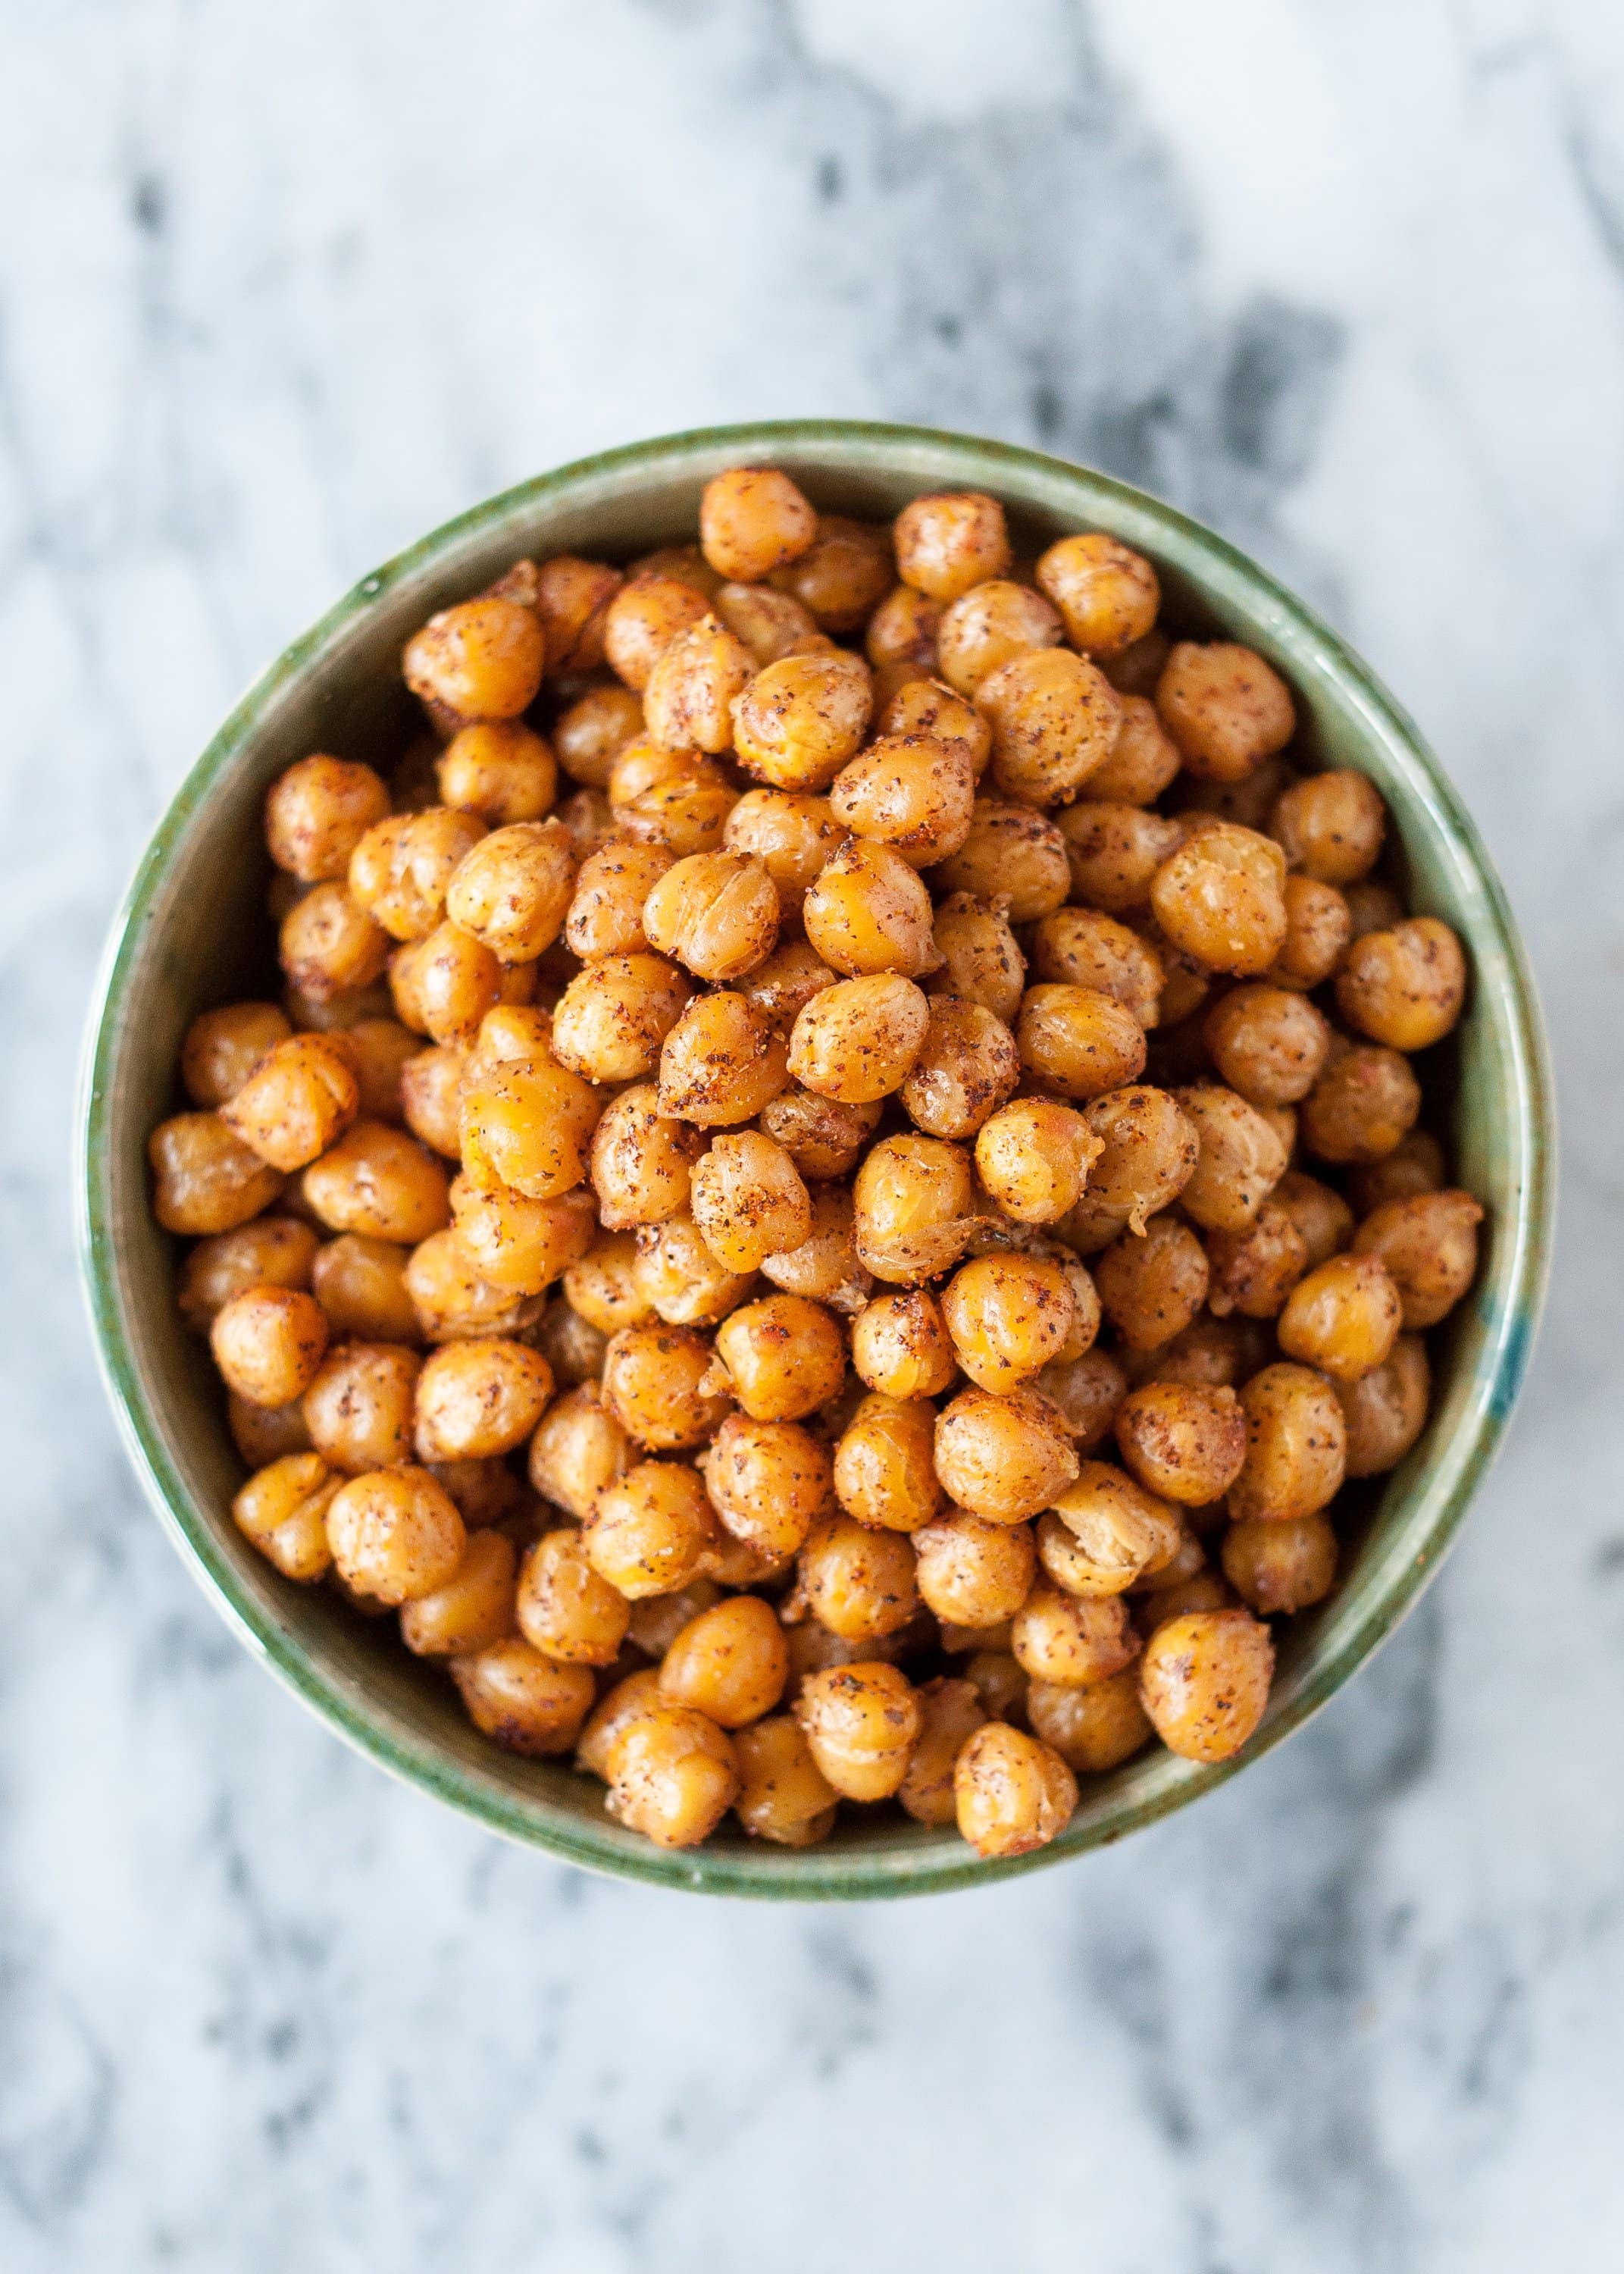 How To Make Crispy Roasted Chickpeas in the Oven | Kitchn